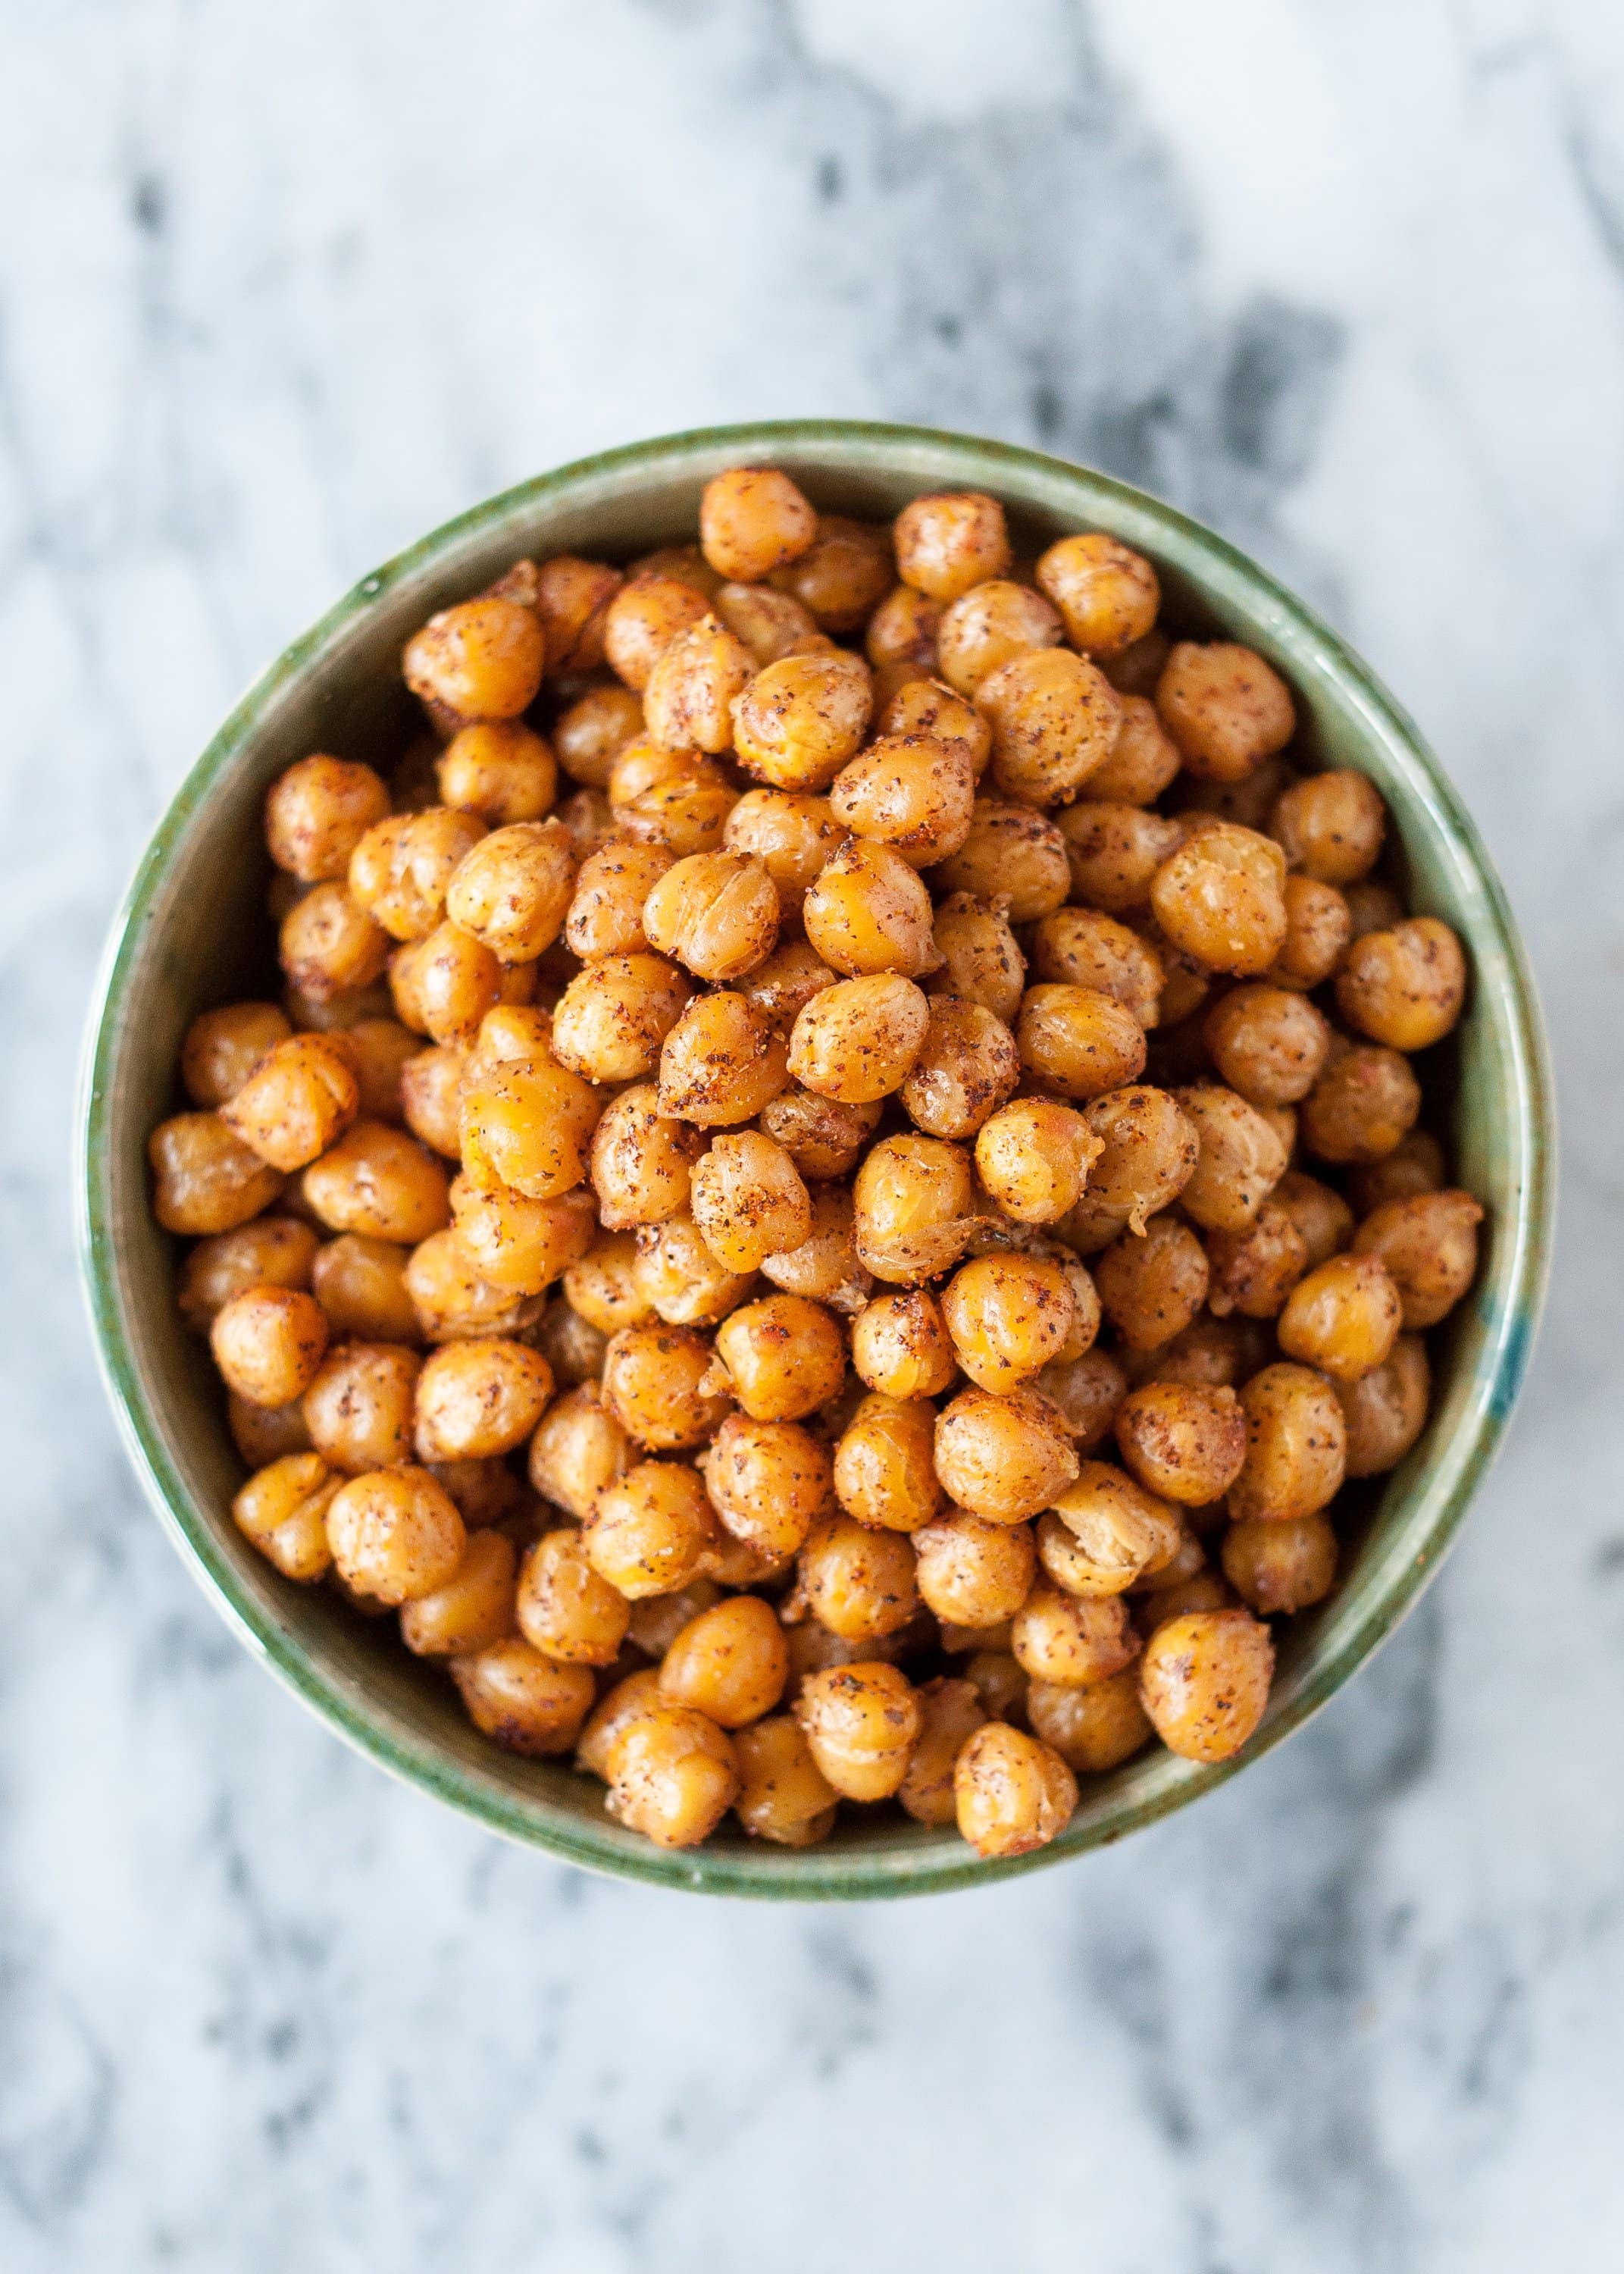 How To Make Crispy Roasted Chickpeas in the Oven | Kitchn